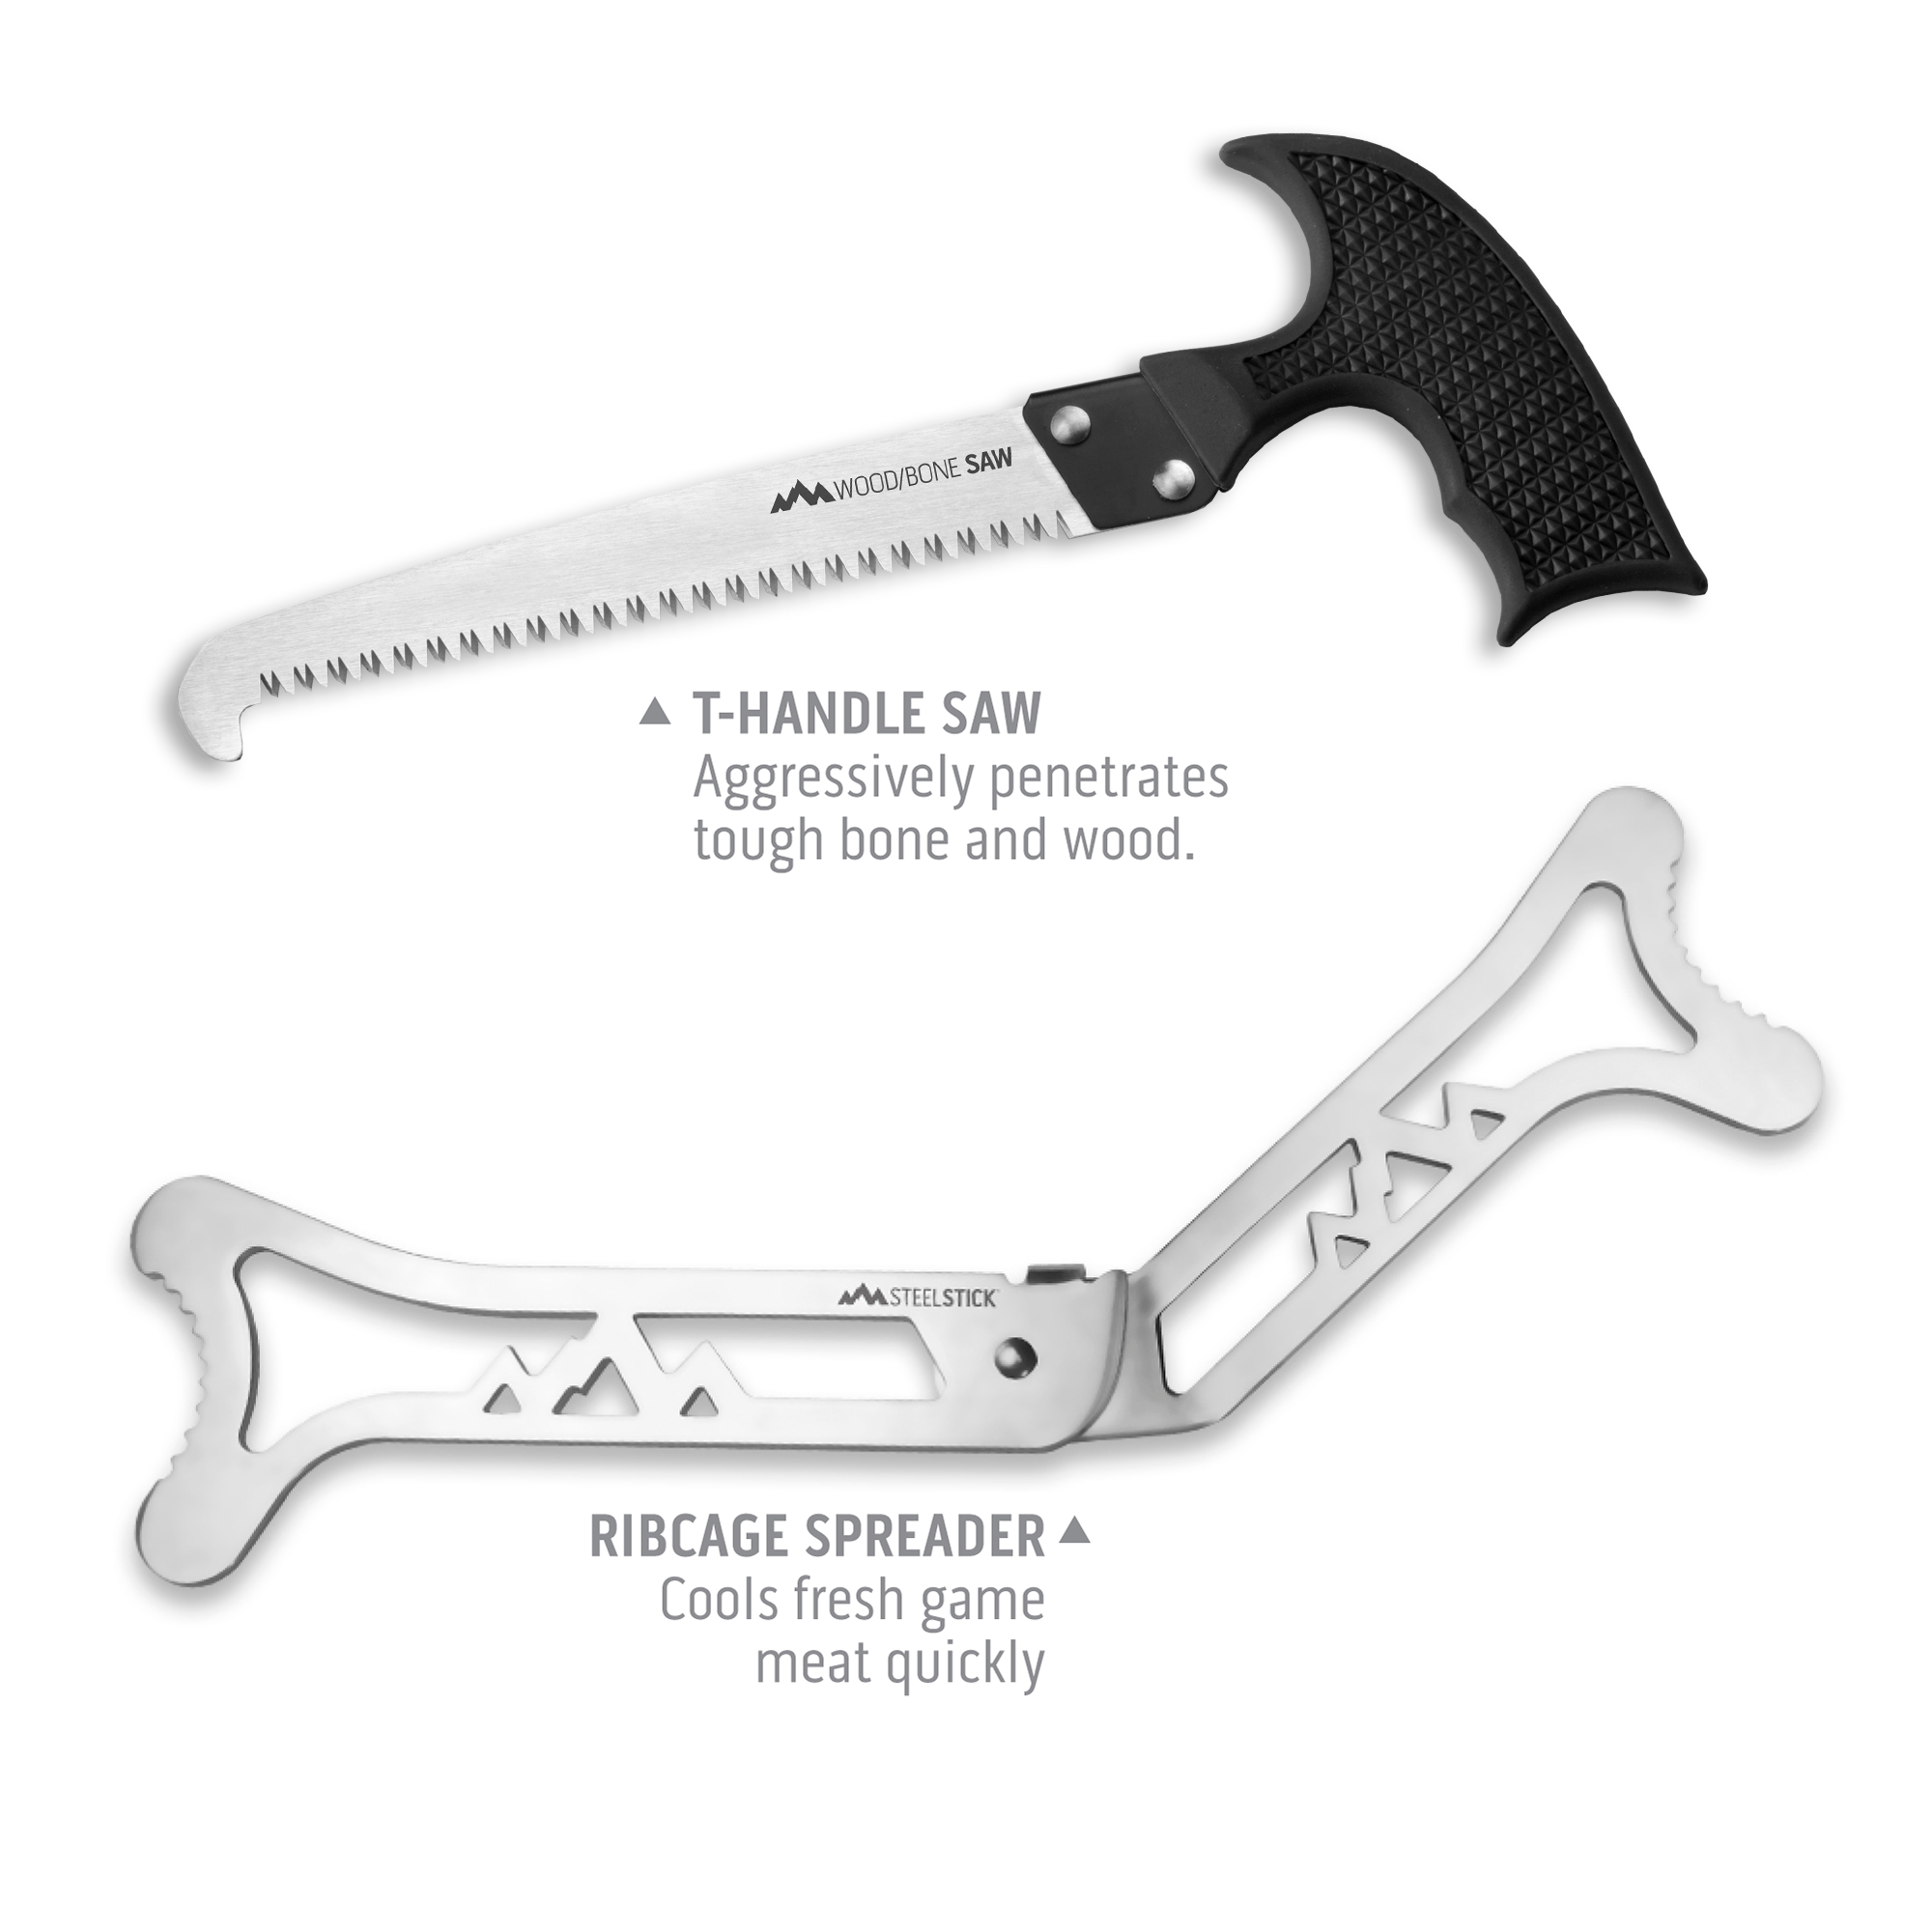 Outdoor Edge ButcherLite Hunting Knife Set Product Photo showing t-handle saw and ribcage spreader.